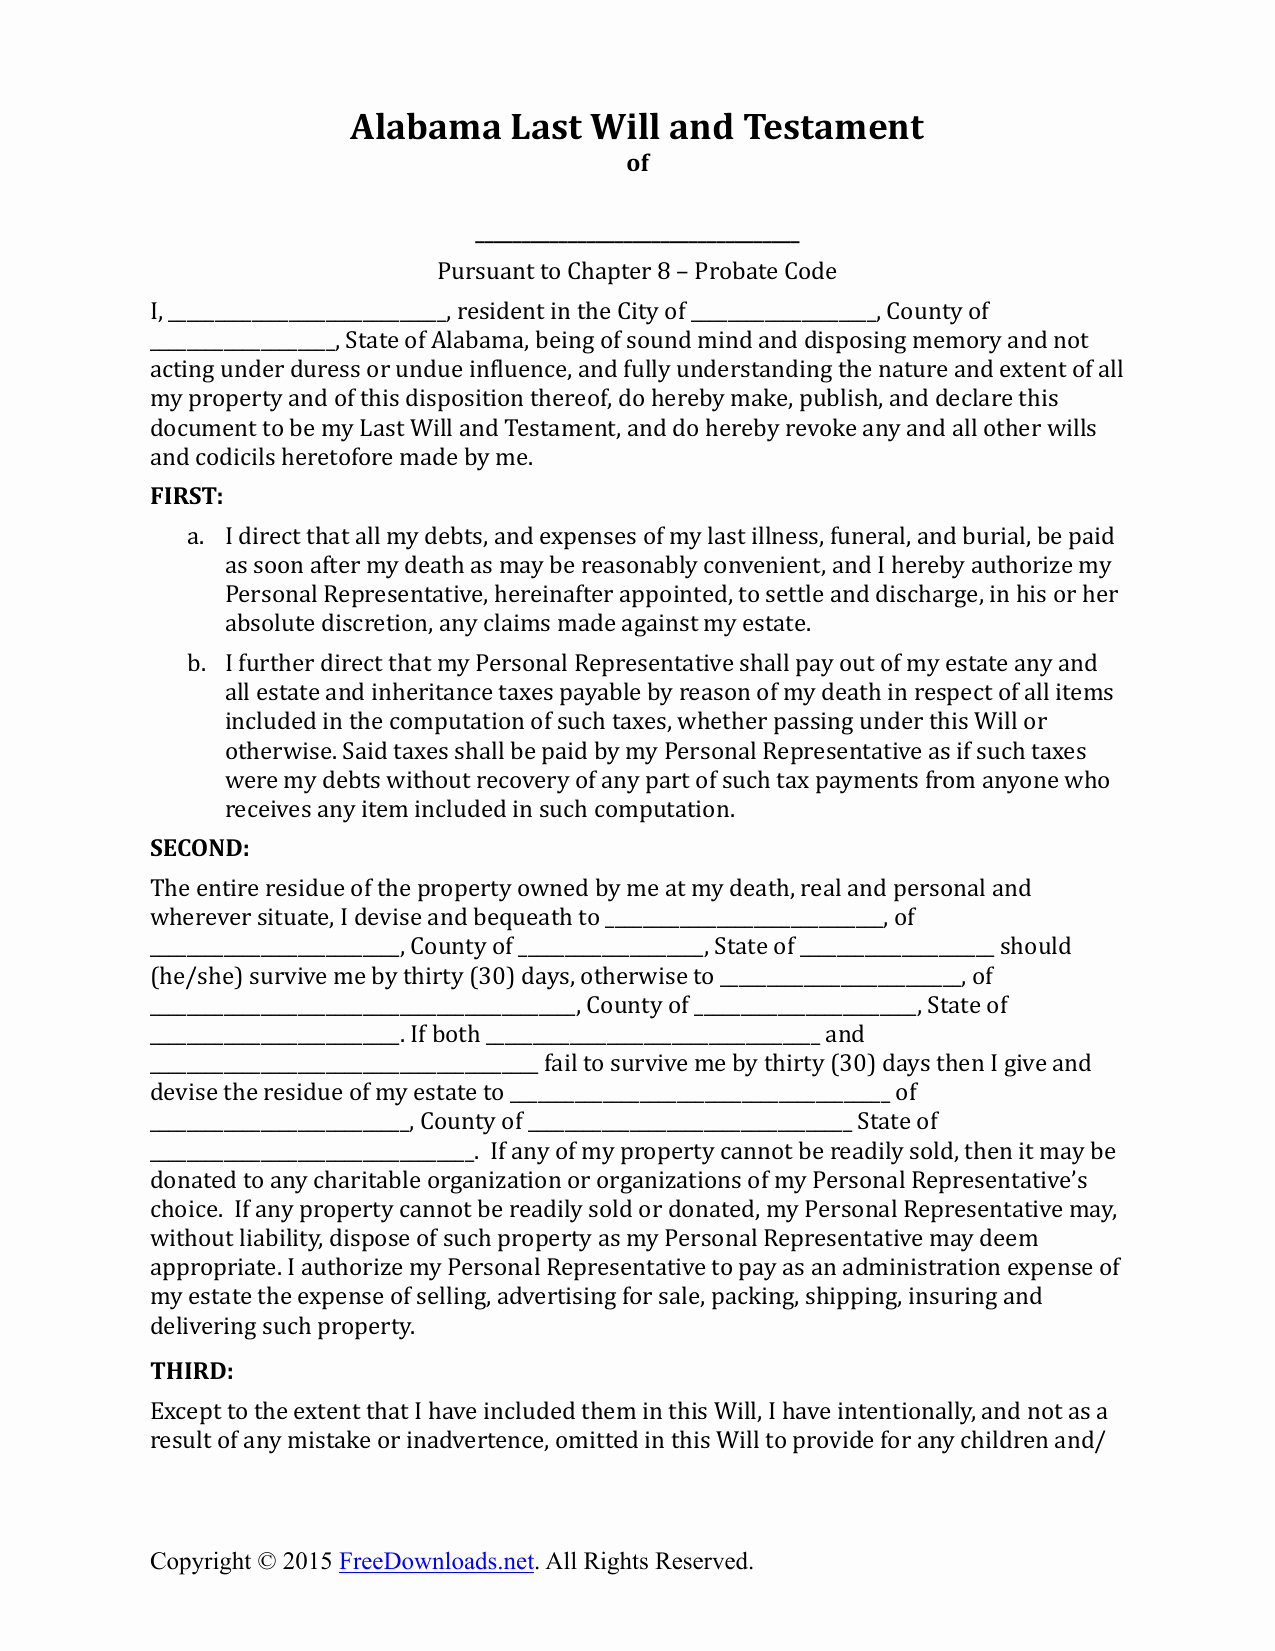 alabama last will and testament form